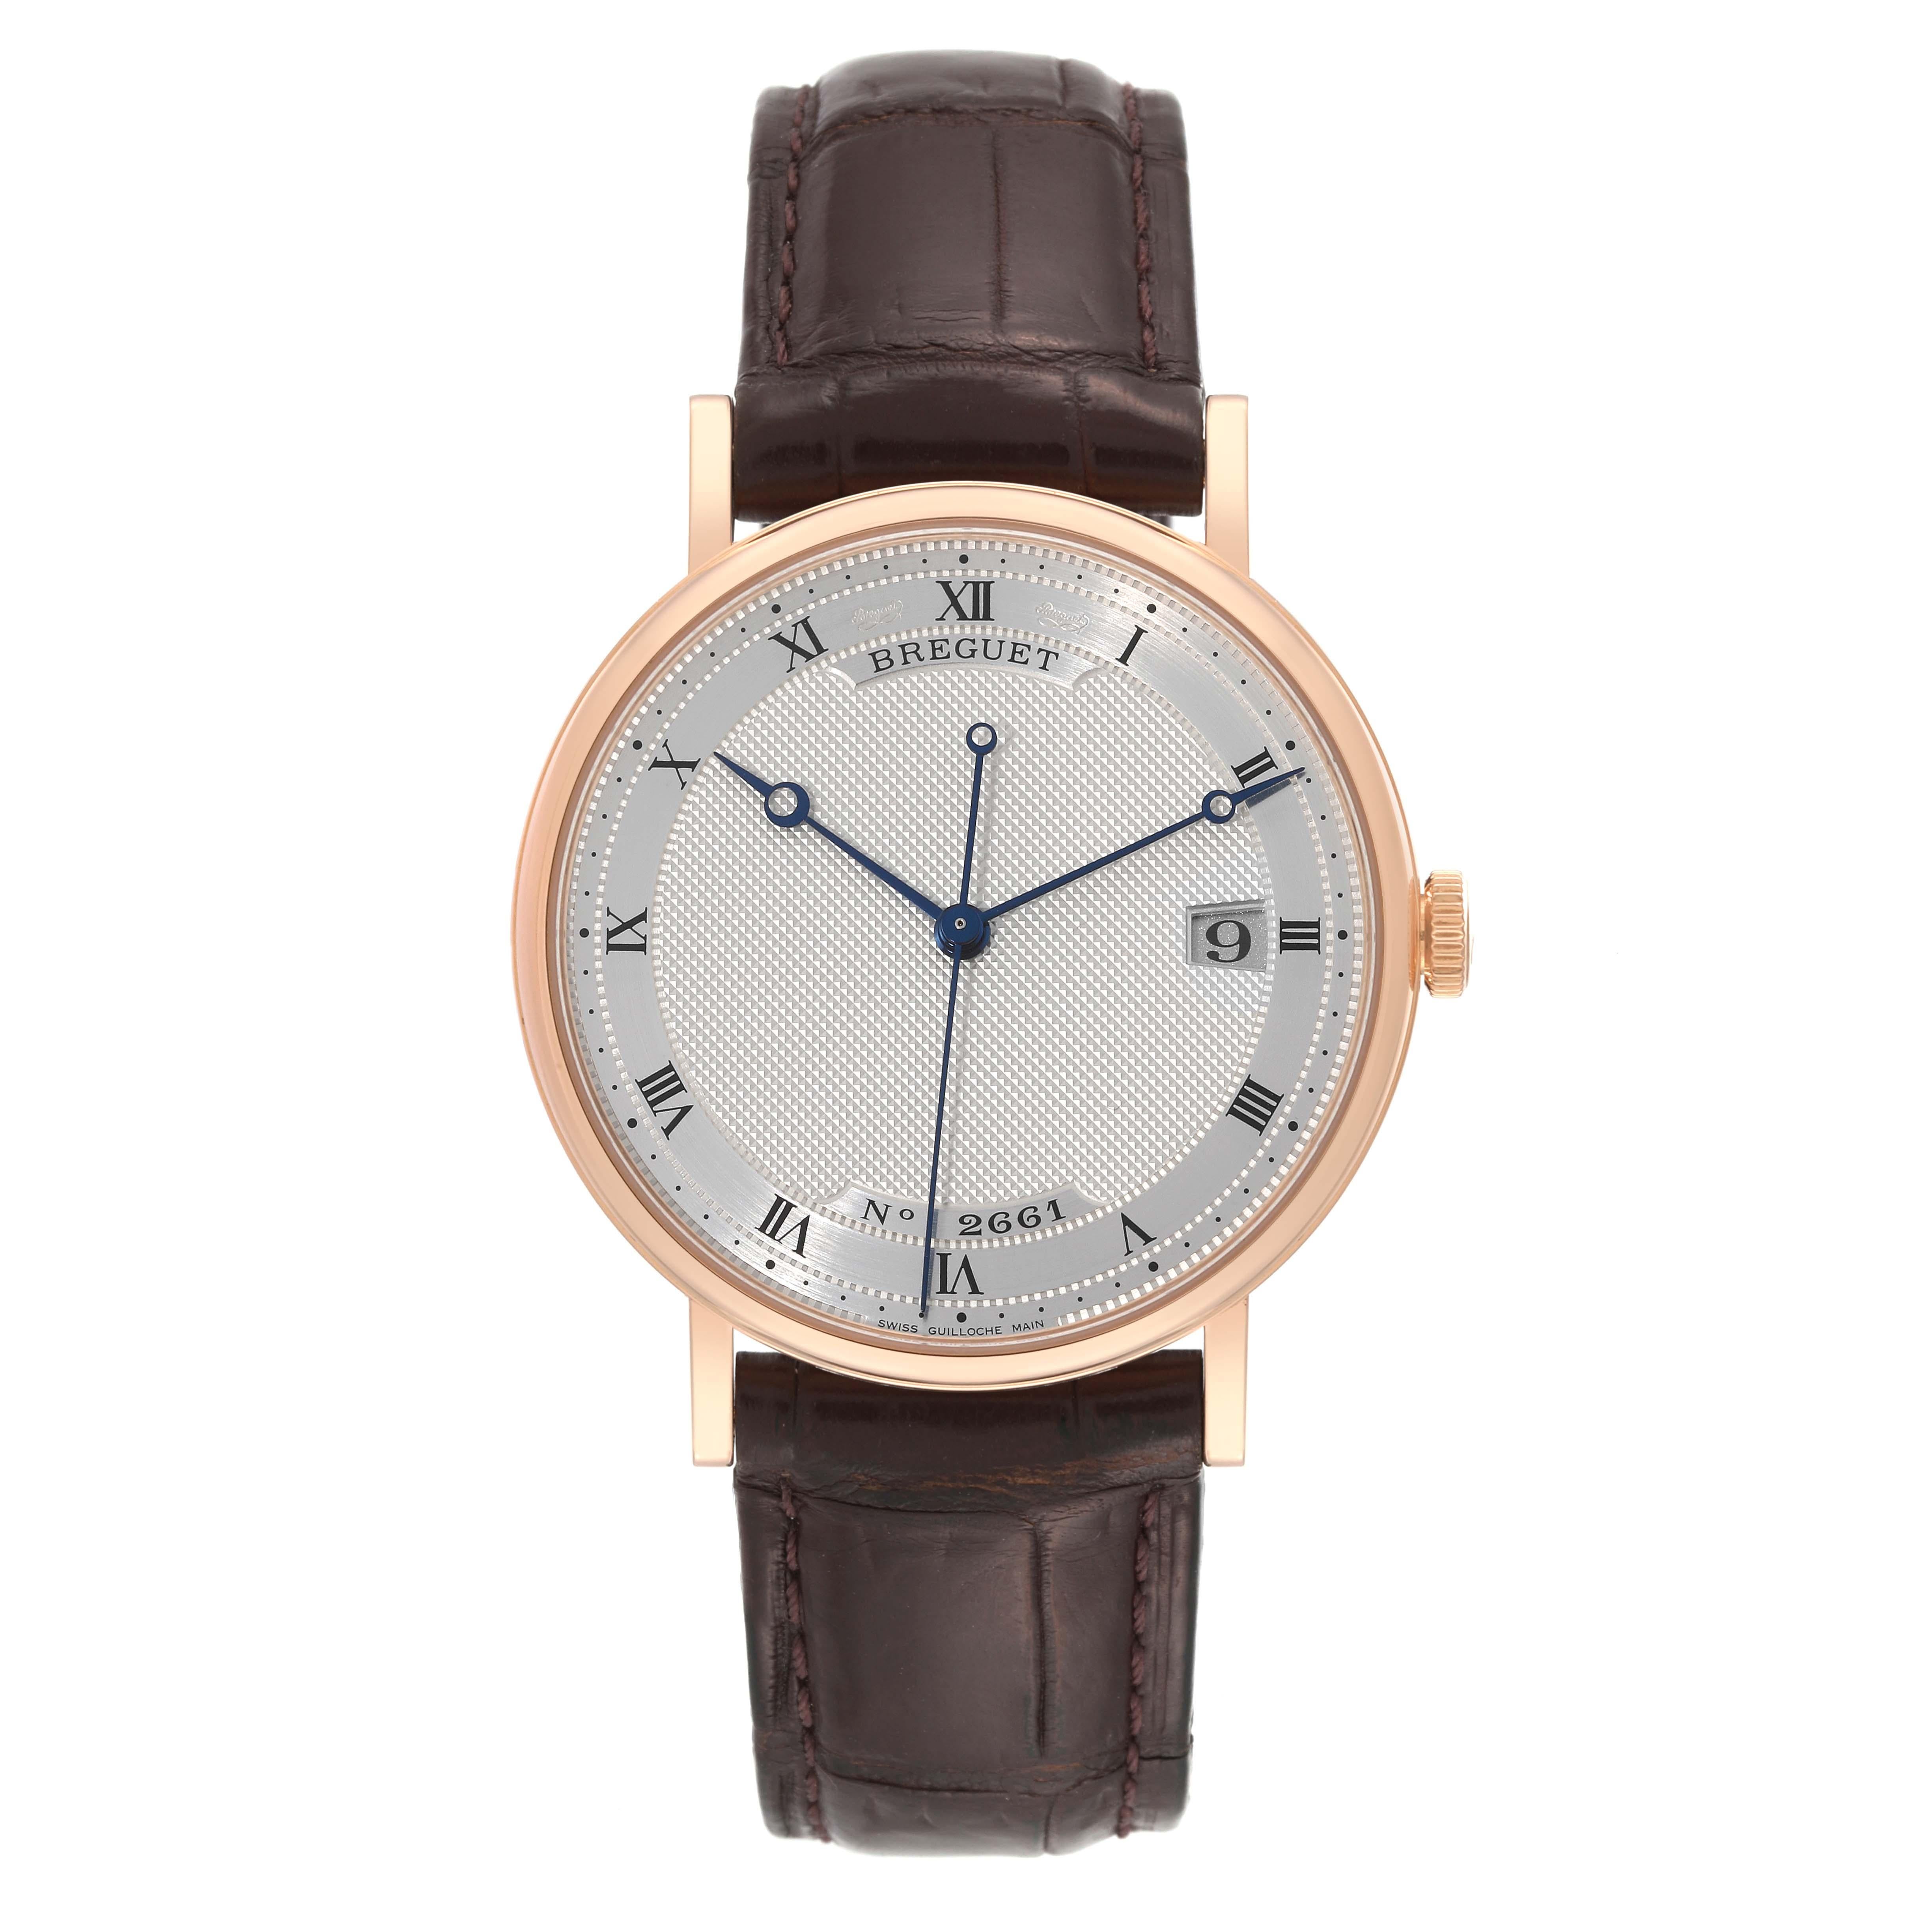 Breguet Classique Rose Gold Silver Dial Mens Watch 5177. Automatic self-winding movement. 18K rose gold coined edged case 38.0 mm in diameter. Transparent exhibition sapphire cyrstal caseback. 18k rose gold bezel. Scratch resistant sapphire crystal.